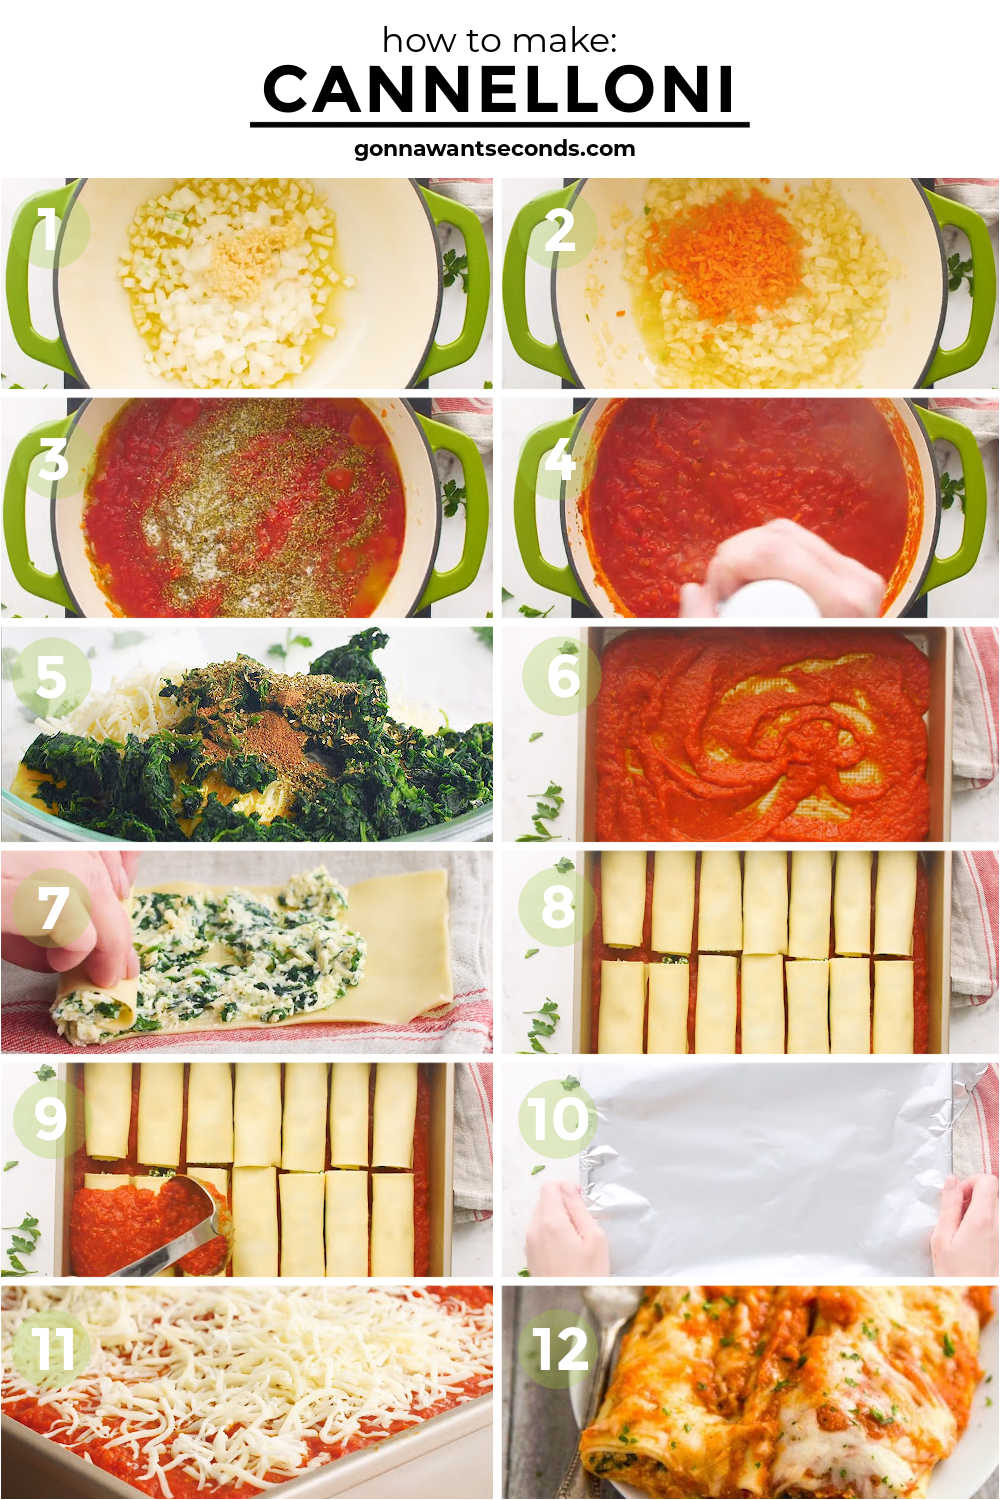 step by step how to make cannelloni